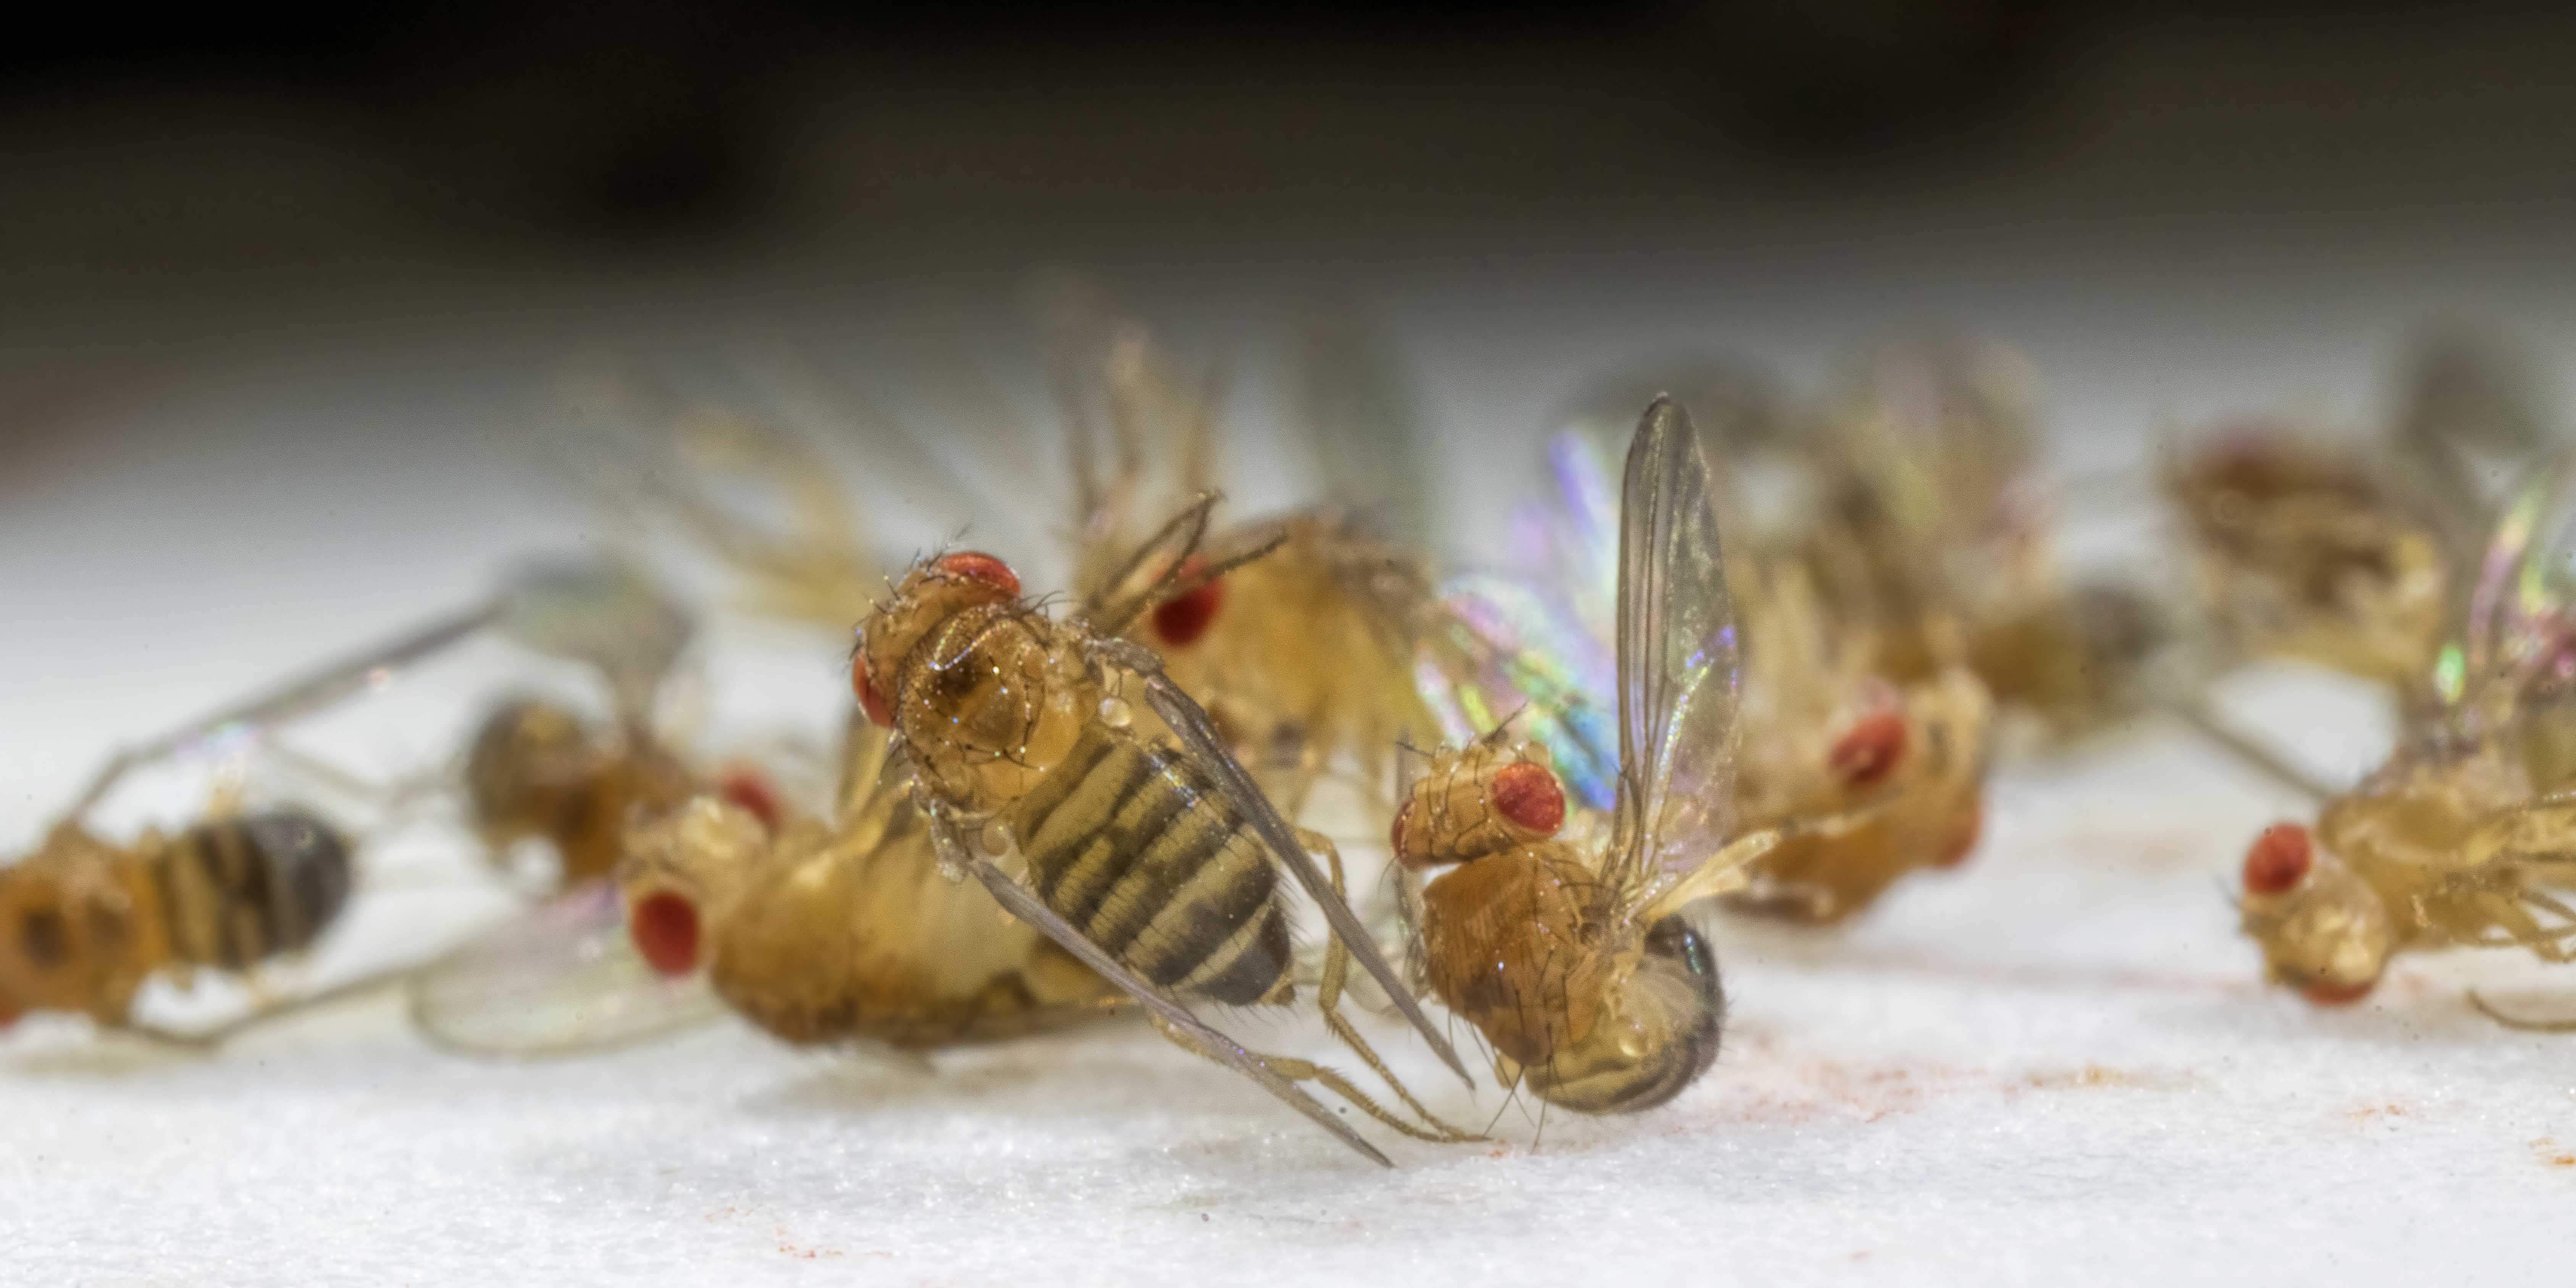 Future Fields and Jenthera Use Fruit Flies for In Vivo CRISPR Therapy